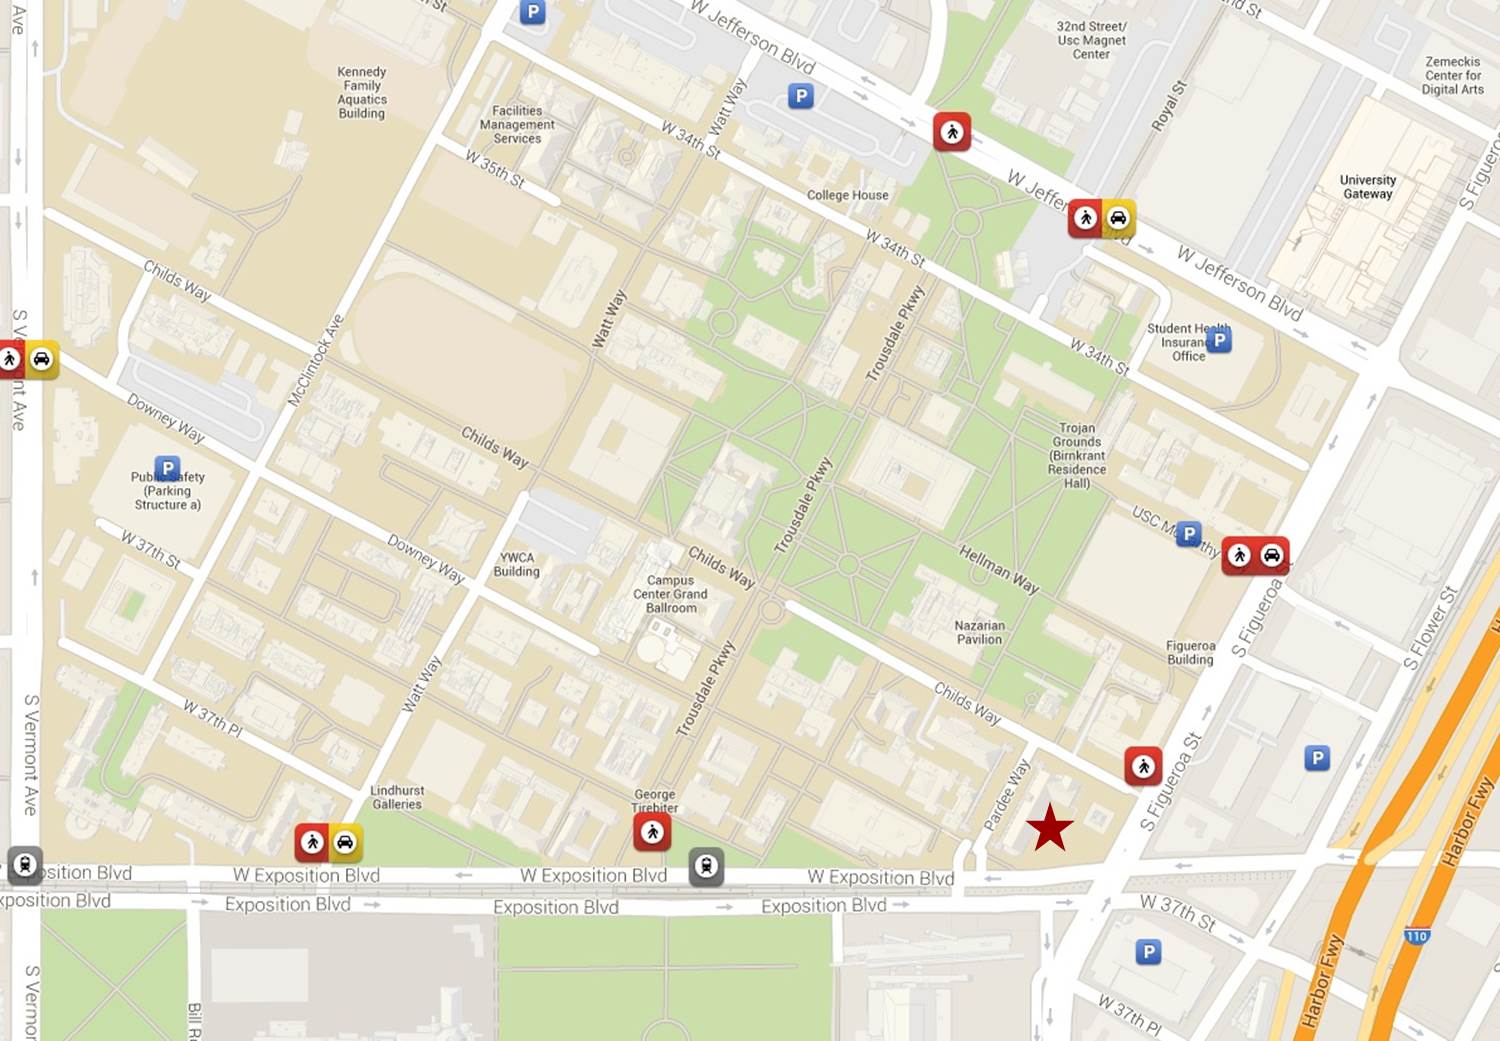 USC Marshall School of Business Campus Map